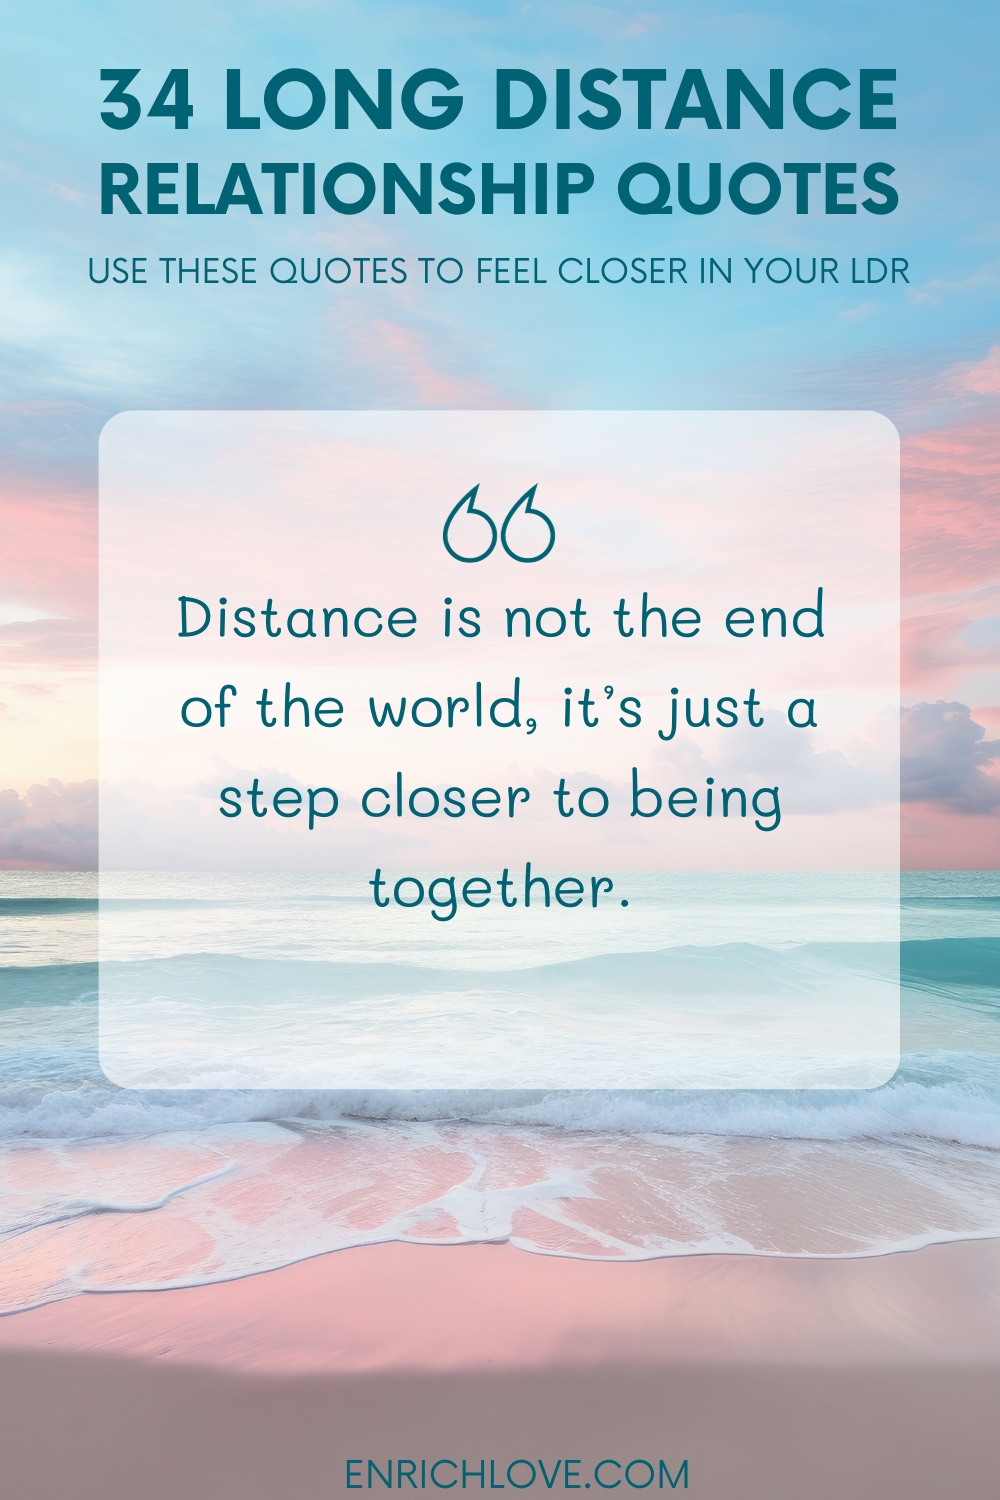 34 Long Distance Relationship Quotes - Distance is not the end of the world, it’s just a step closer to being together.